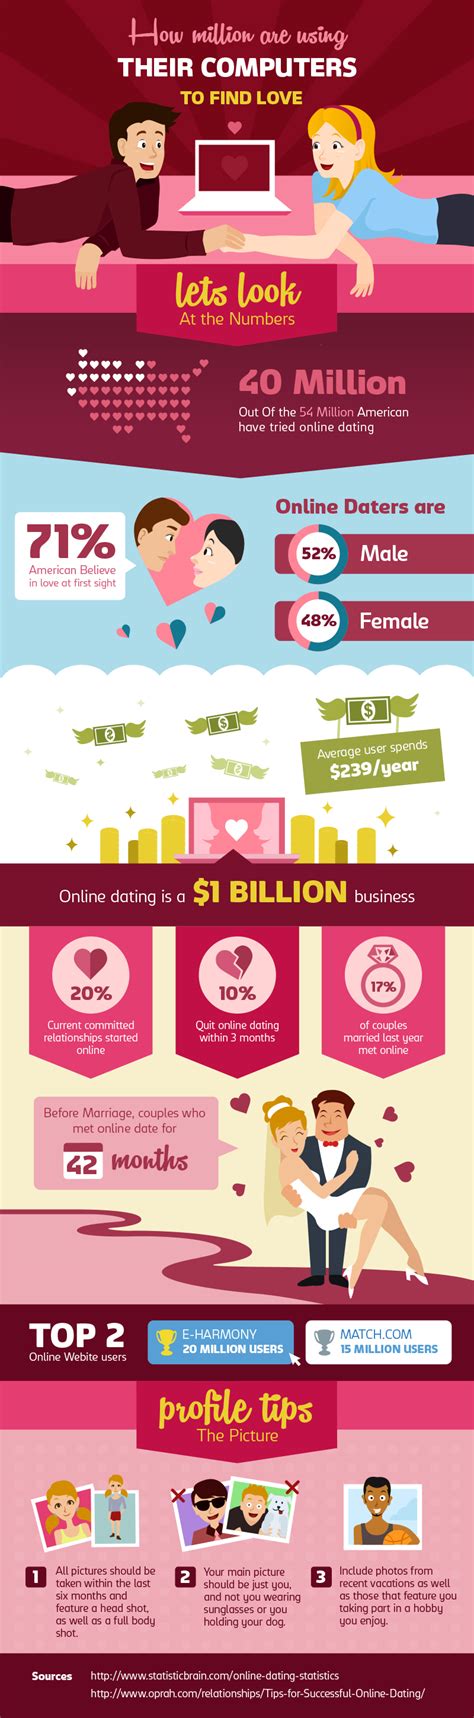 online dating infographic behance